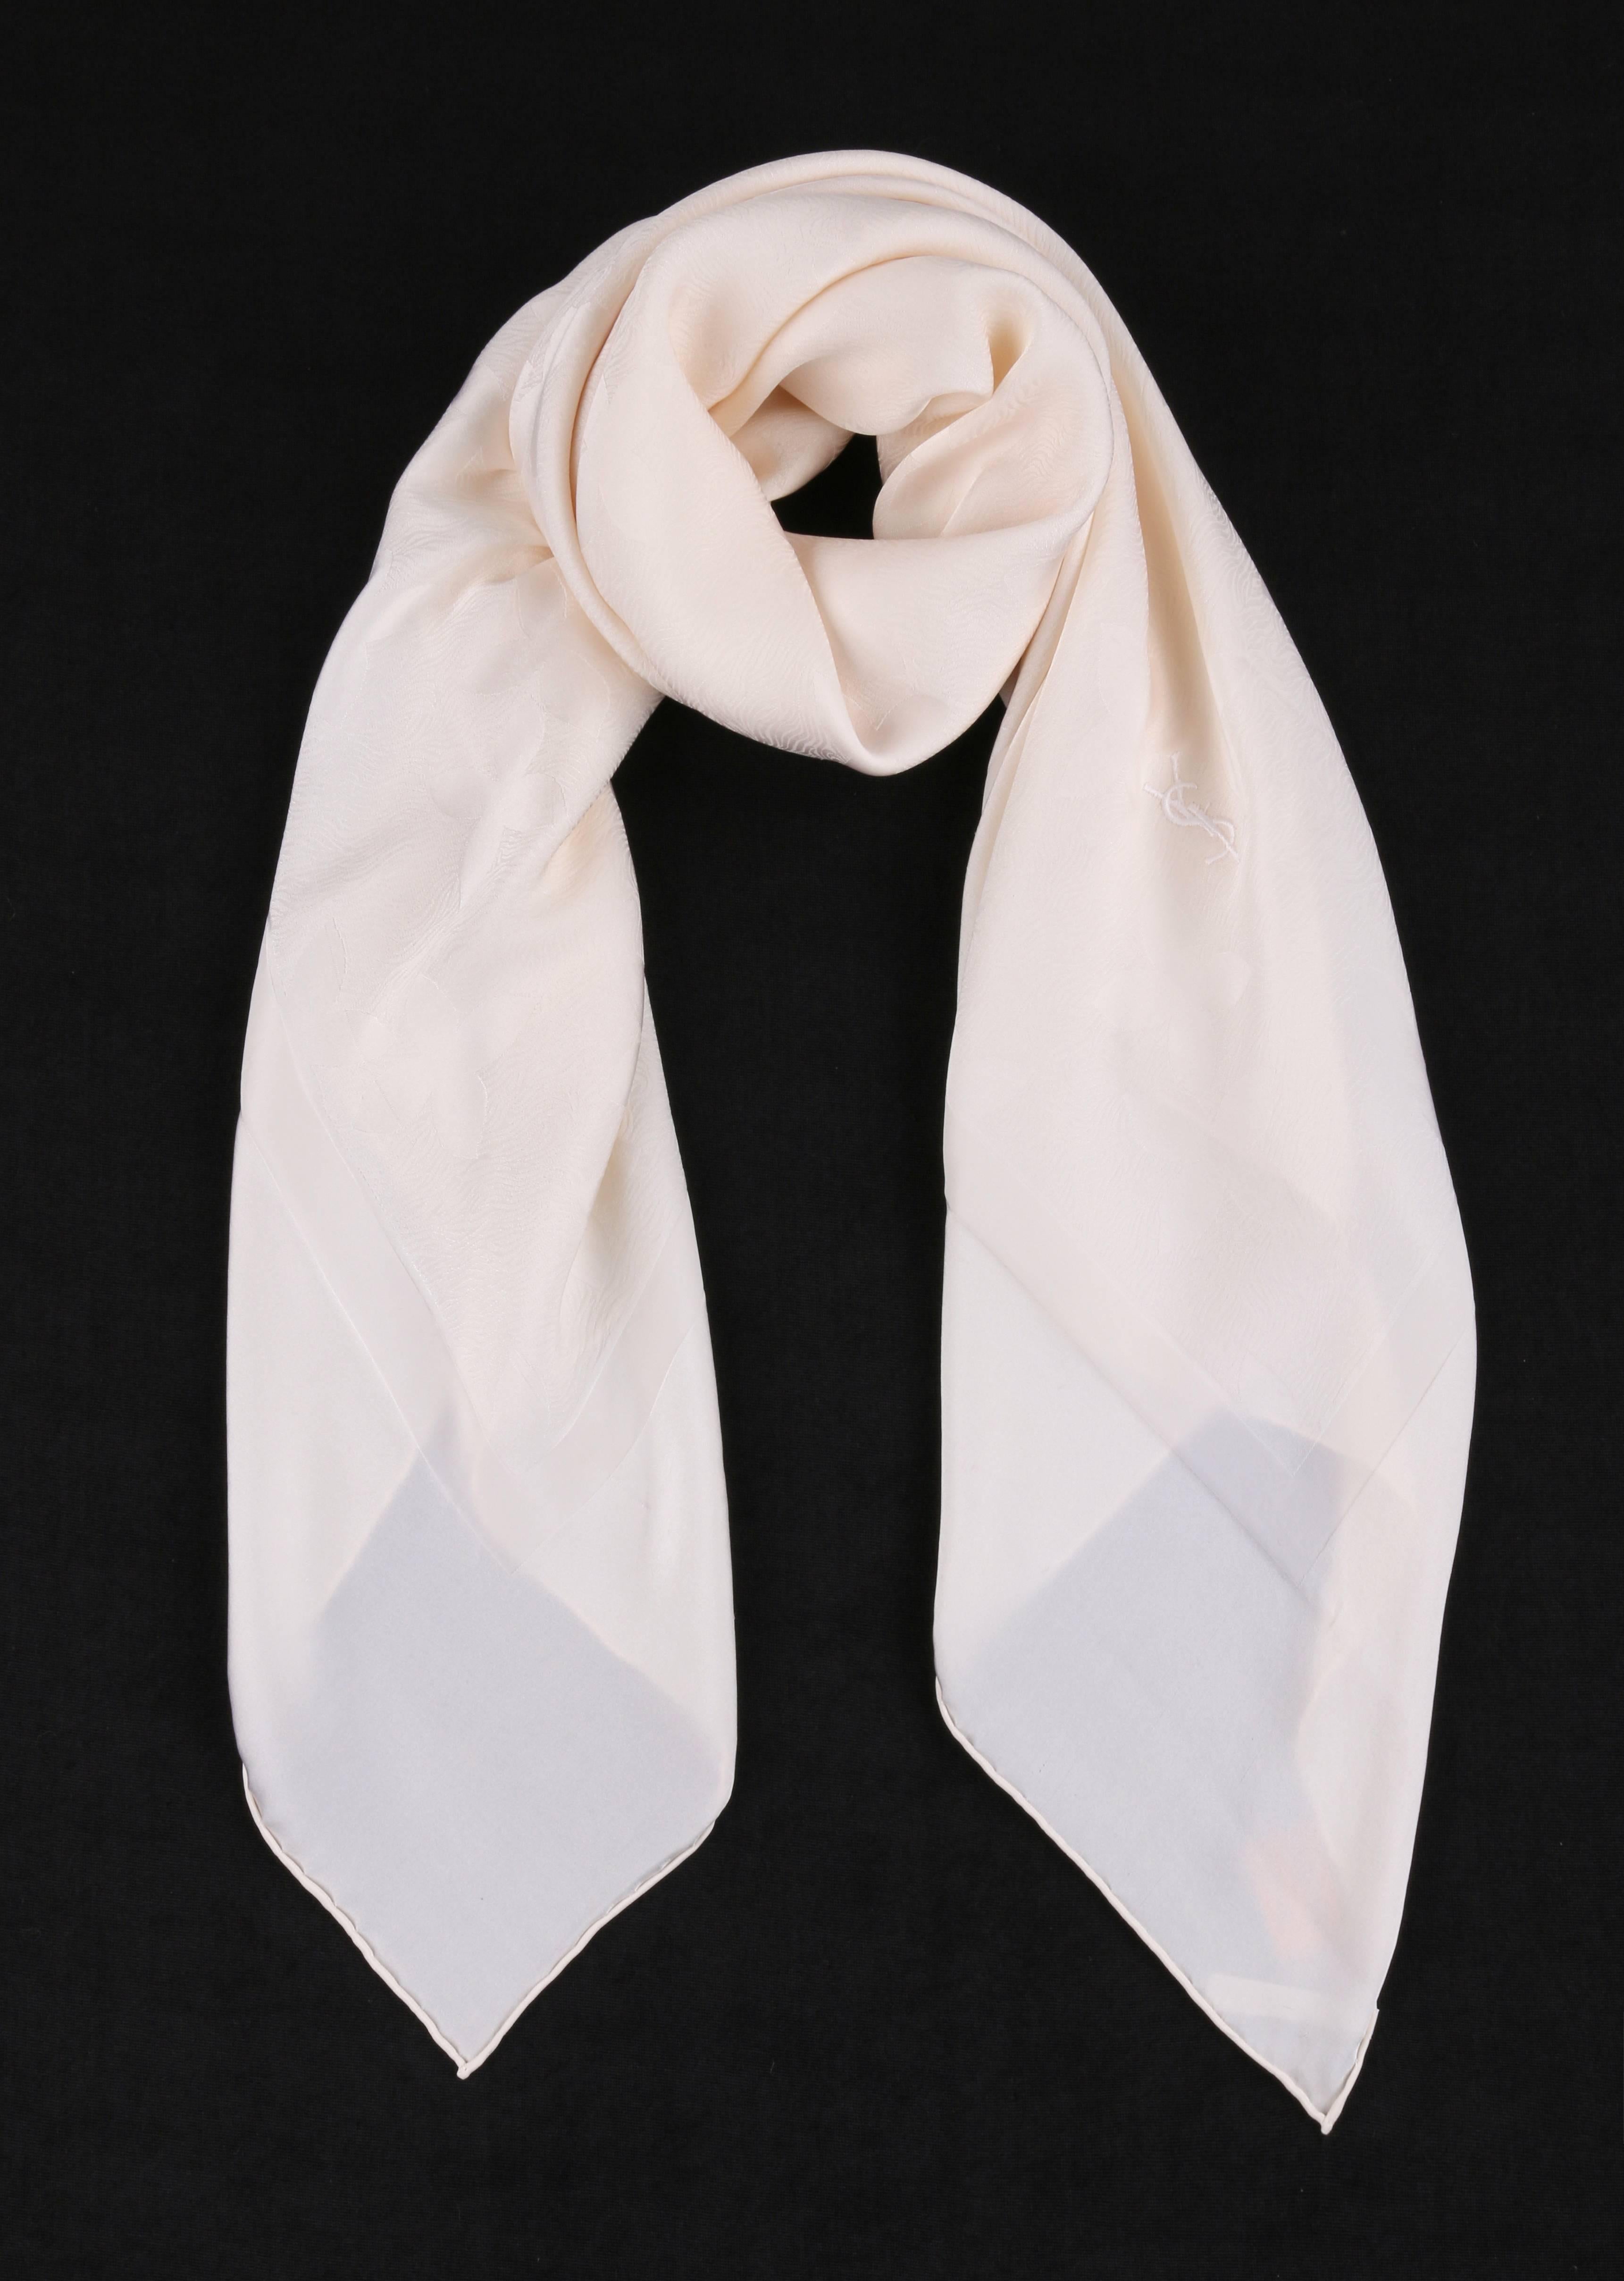 Yves Saint Lauren Fourlards YSL off white floral damask silk scarf / wrap. Solid off white exterior boarder with thin raised interior border. All over floral and striped wood grain motif at center. 